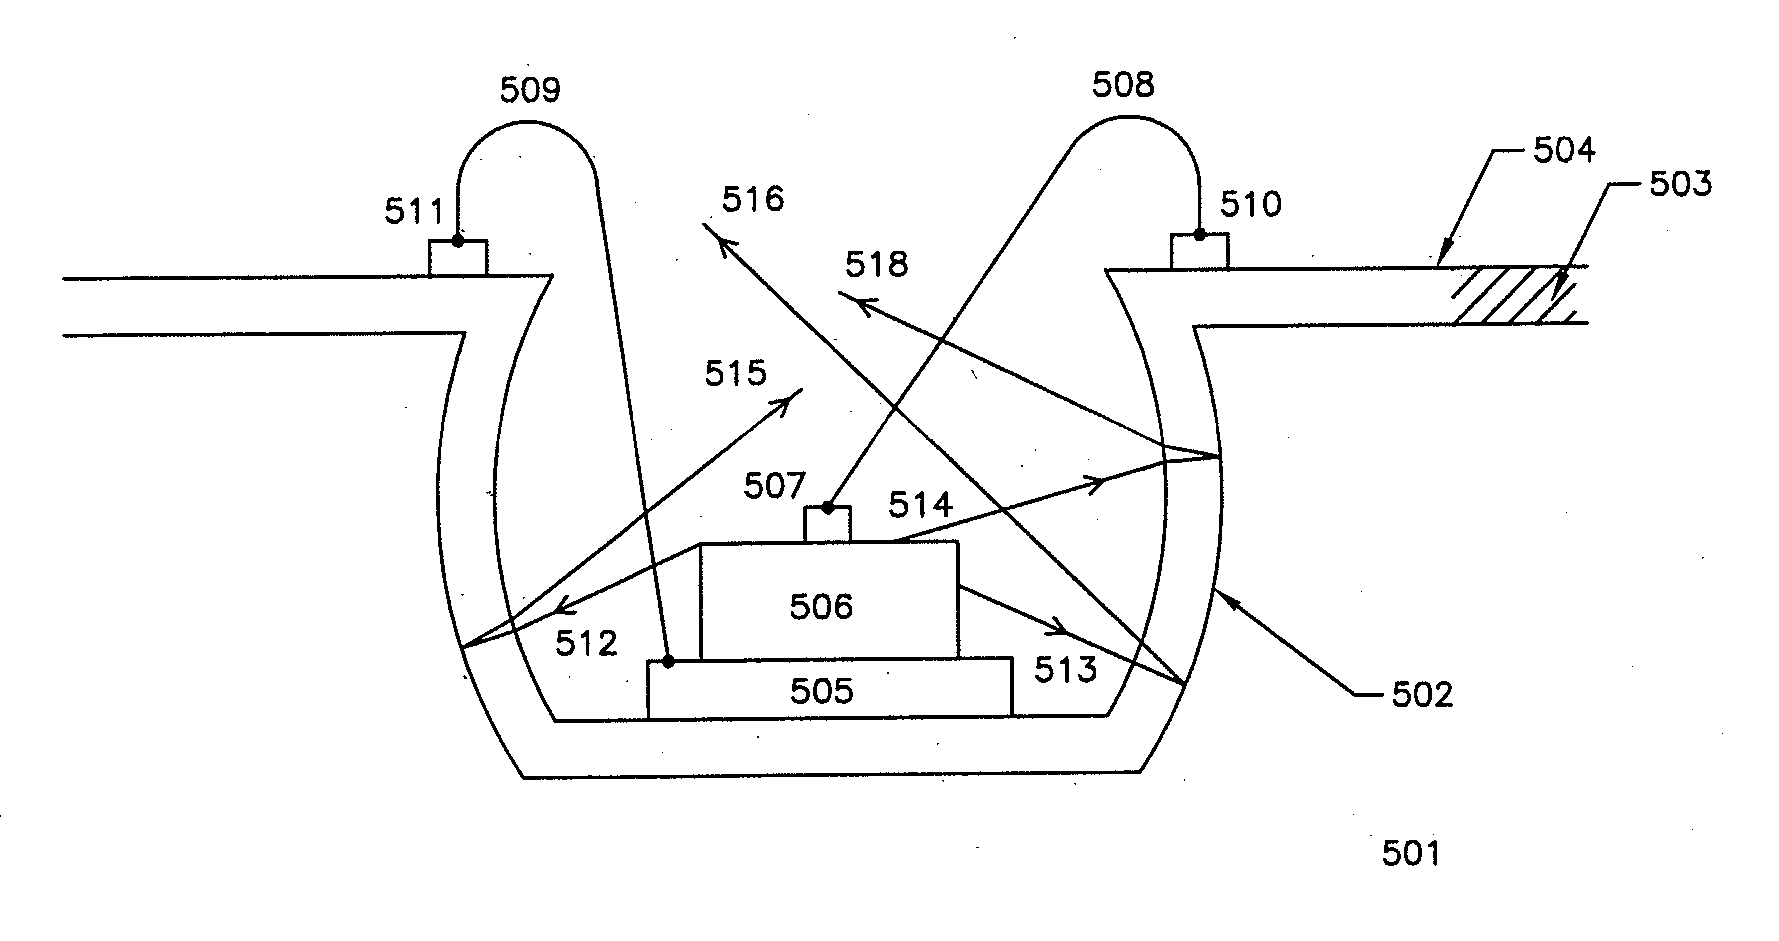 Light Emitting Diode Submount With High Thermal Conductivity For High Power Operation